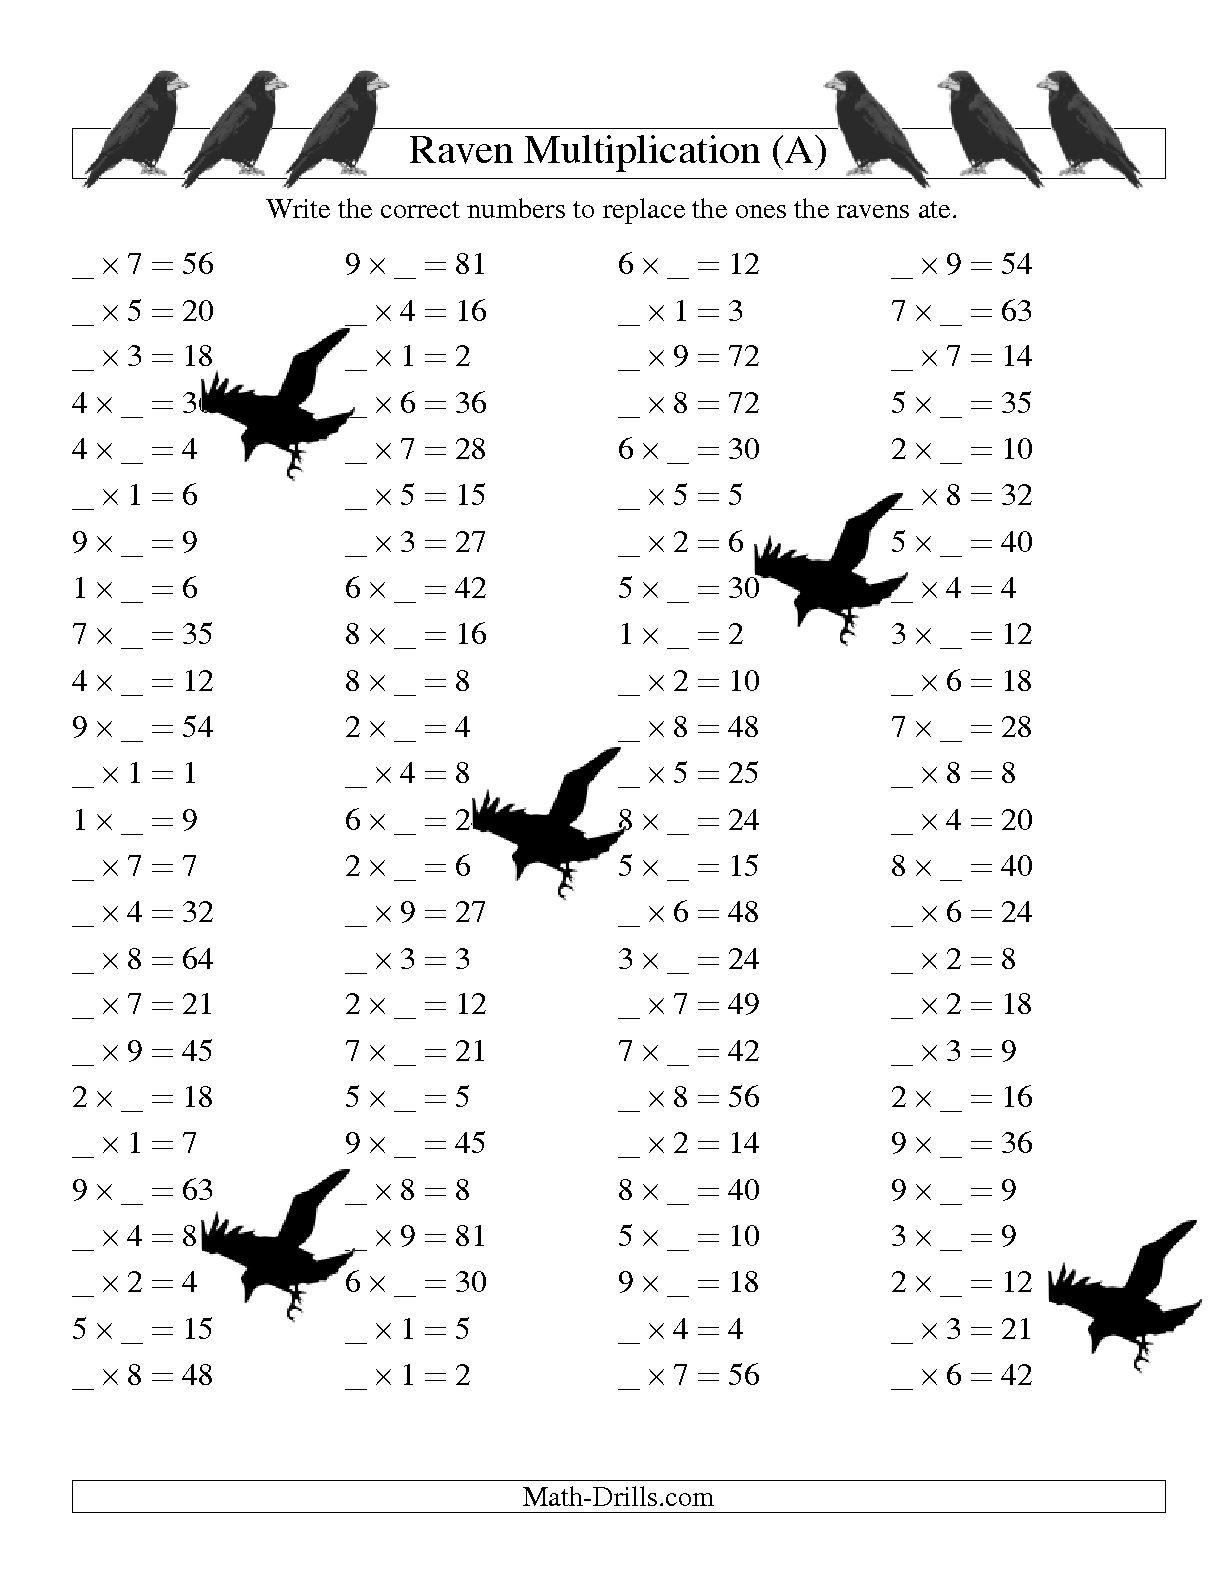 13-best-images-of-computer-terms-worksheet-computer-word-search-worksheets-halloween-math